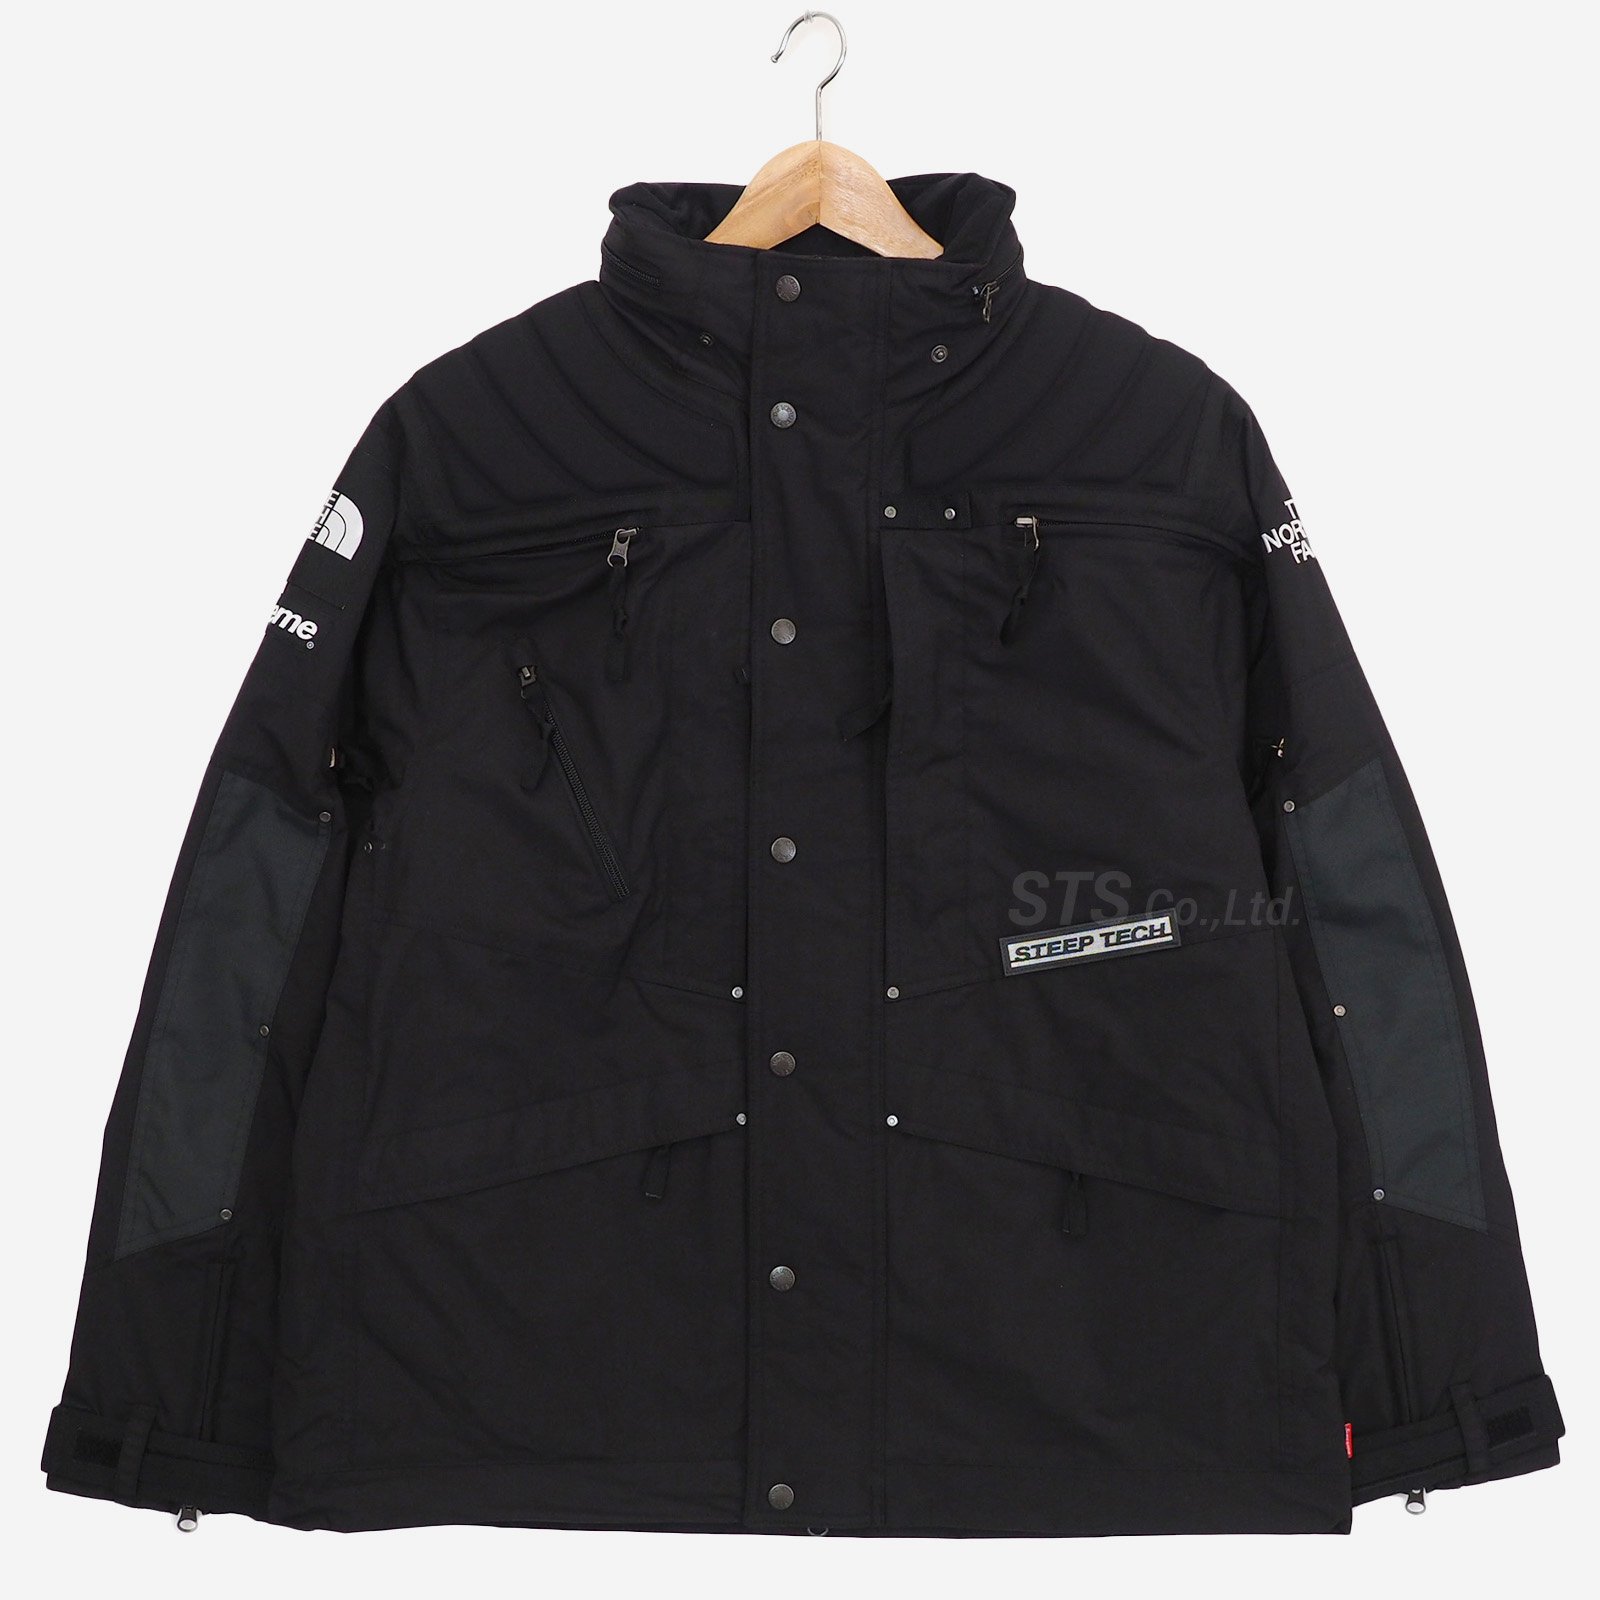 Supreme/The North Face Steep Tech Apogee Jacket - ParkSIDER